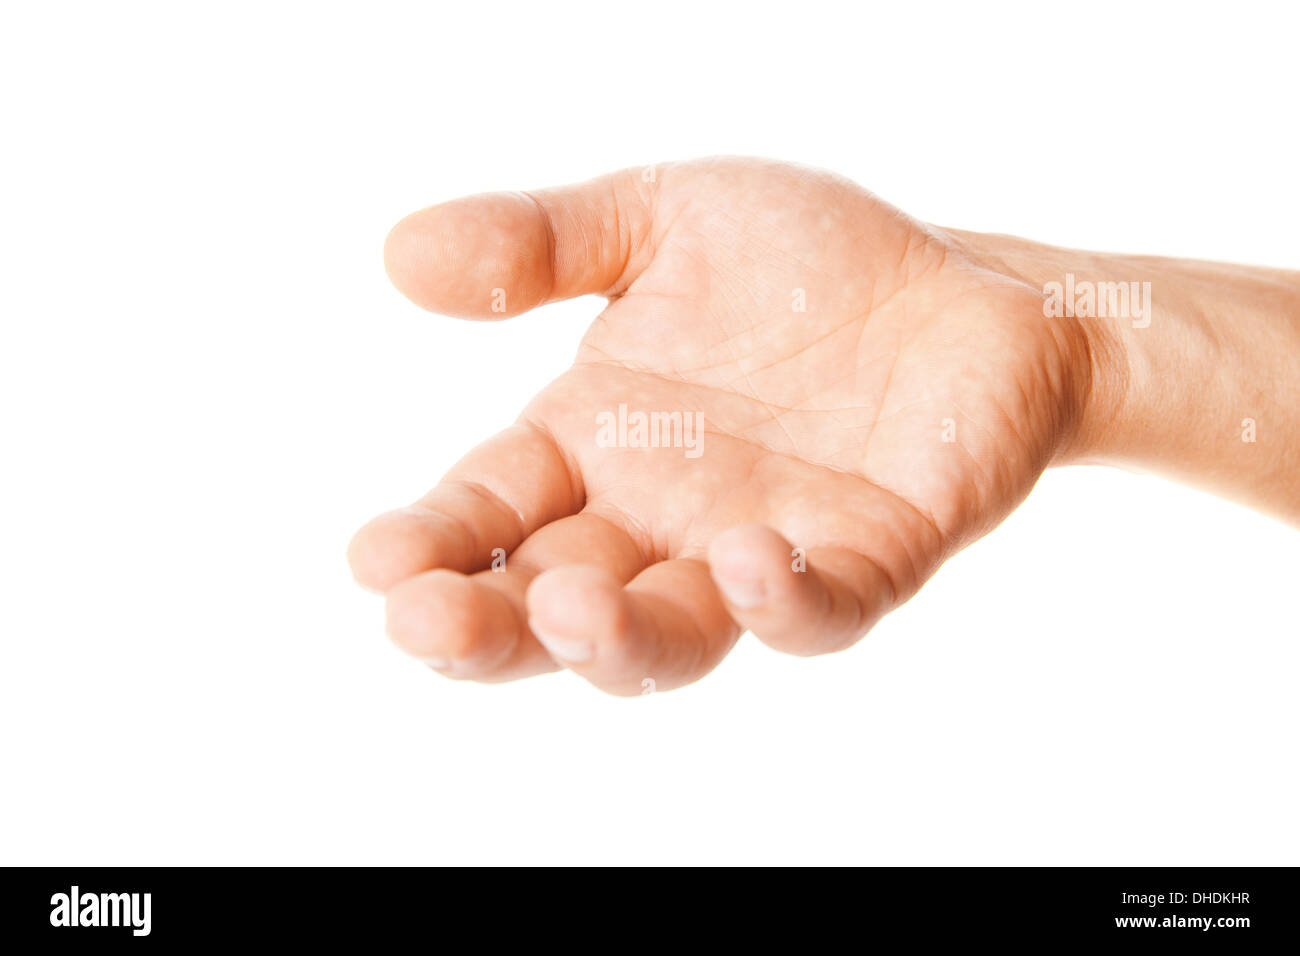 Open palm hand gesture of male hand. Isolated on a white background Stock Photo